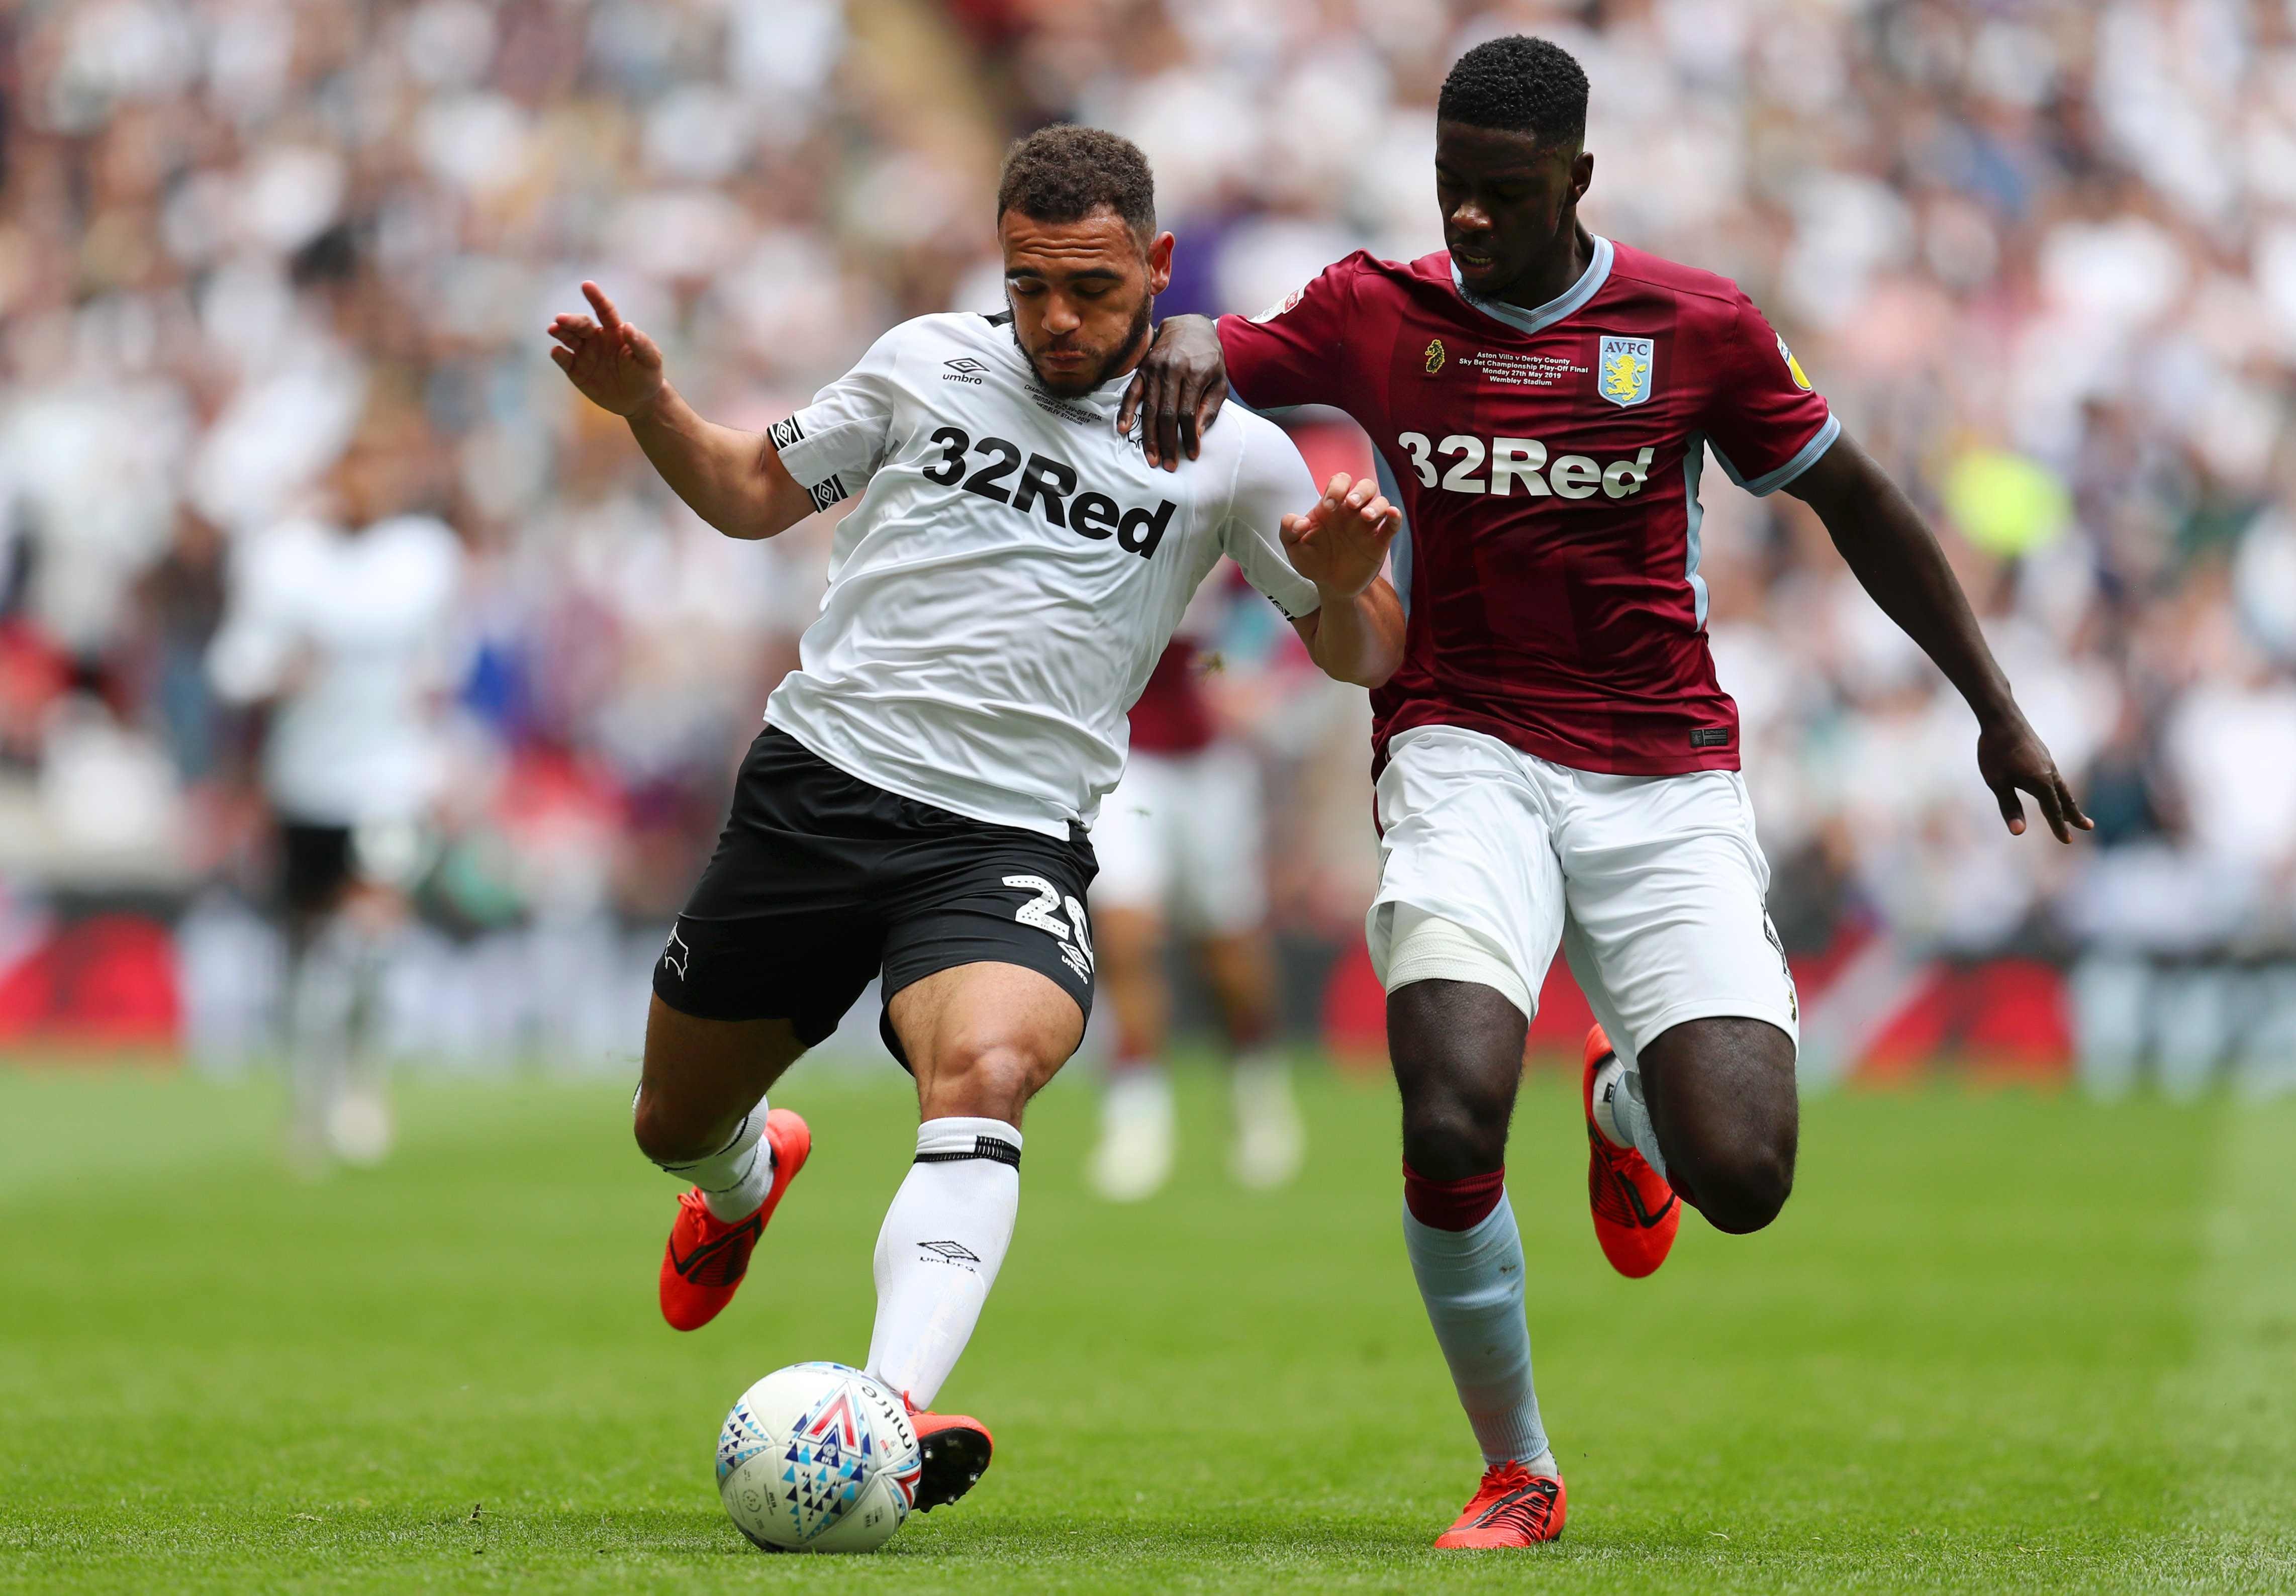 LONDON, ENGLAND - MAY 27:   Mason Bennett of Derby County battles for possession with Axel Tuanzebe of Aston Villa  during the Sky Bet Championship Play-off Final match between Aston Villa and Derby County at Wembley Stadium on May 27, 2019 in London, United Kingdom. (Photo by Catherine Ivill/Getty Images)